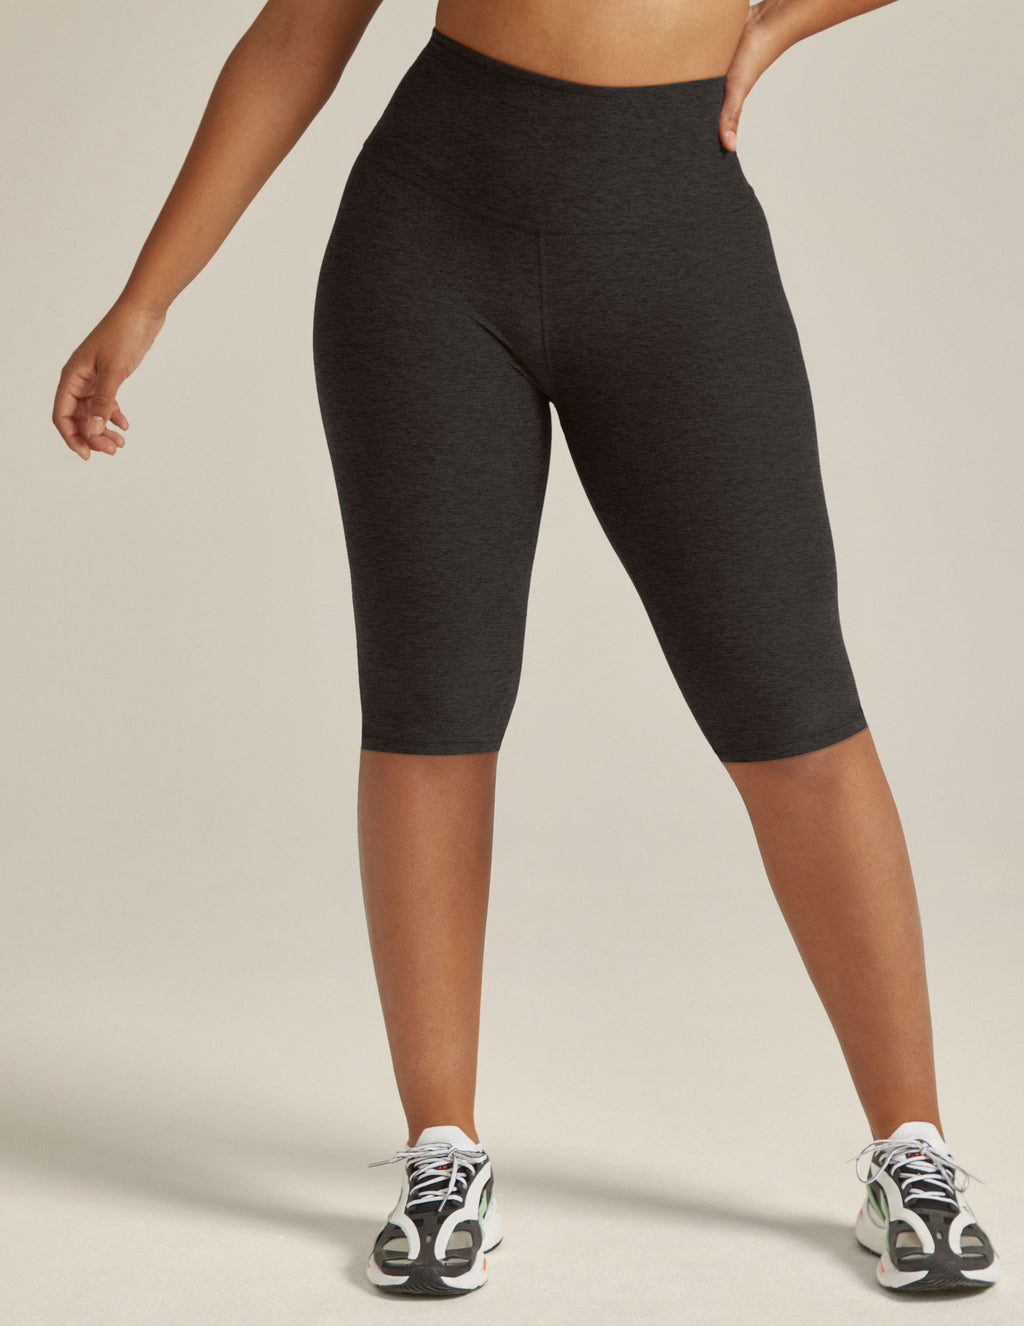 Spacedye Pedal Pusher High Waisted Legging Featured Image